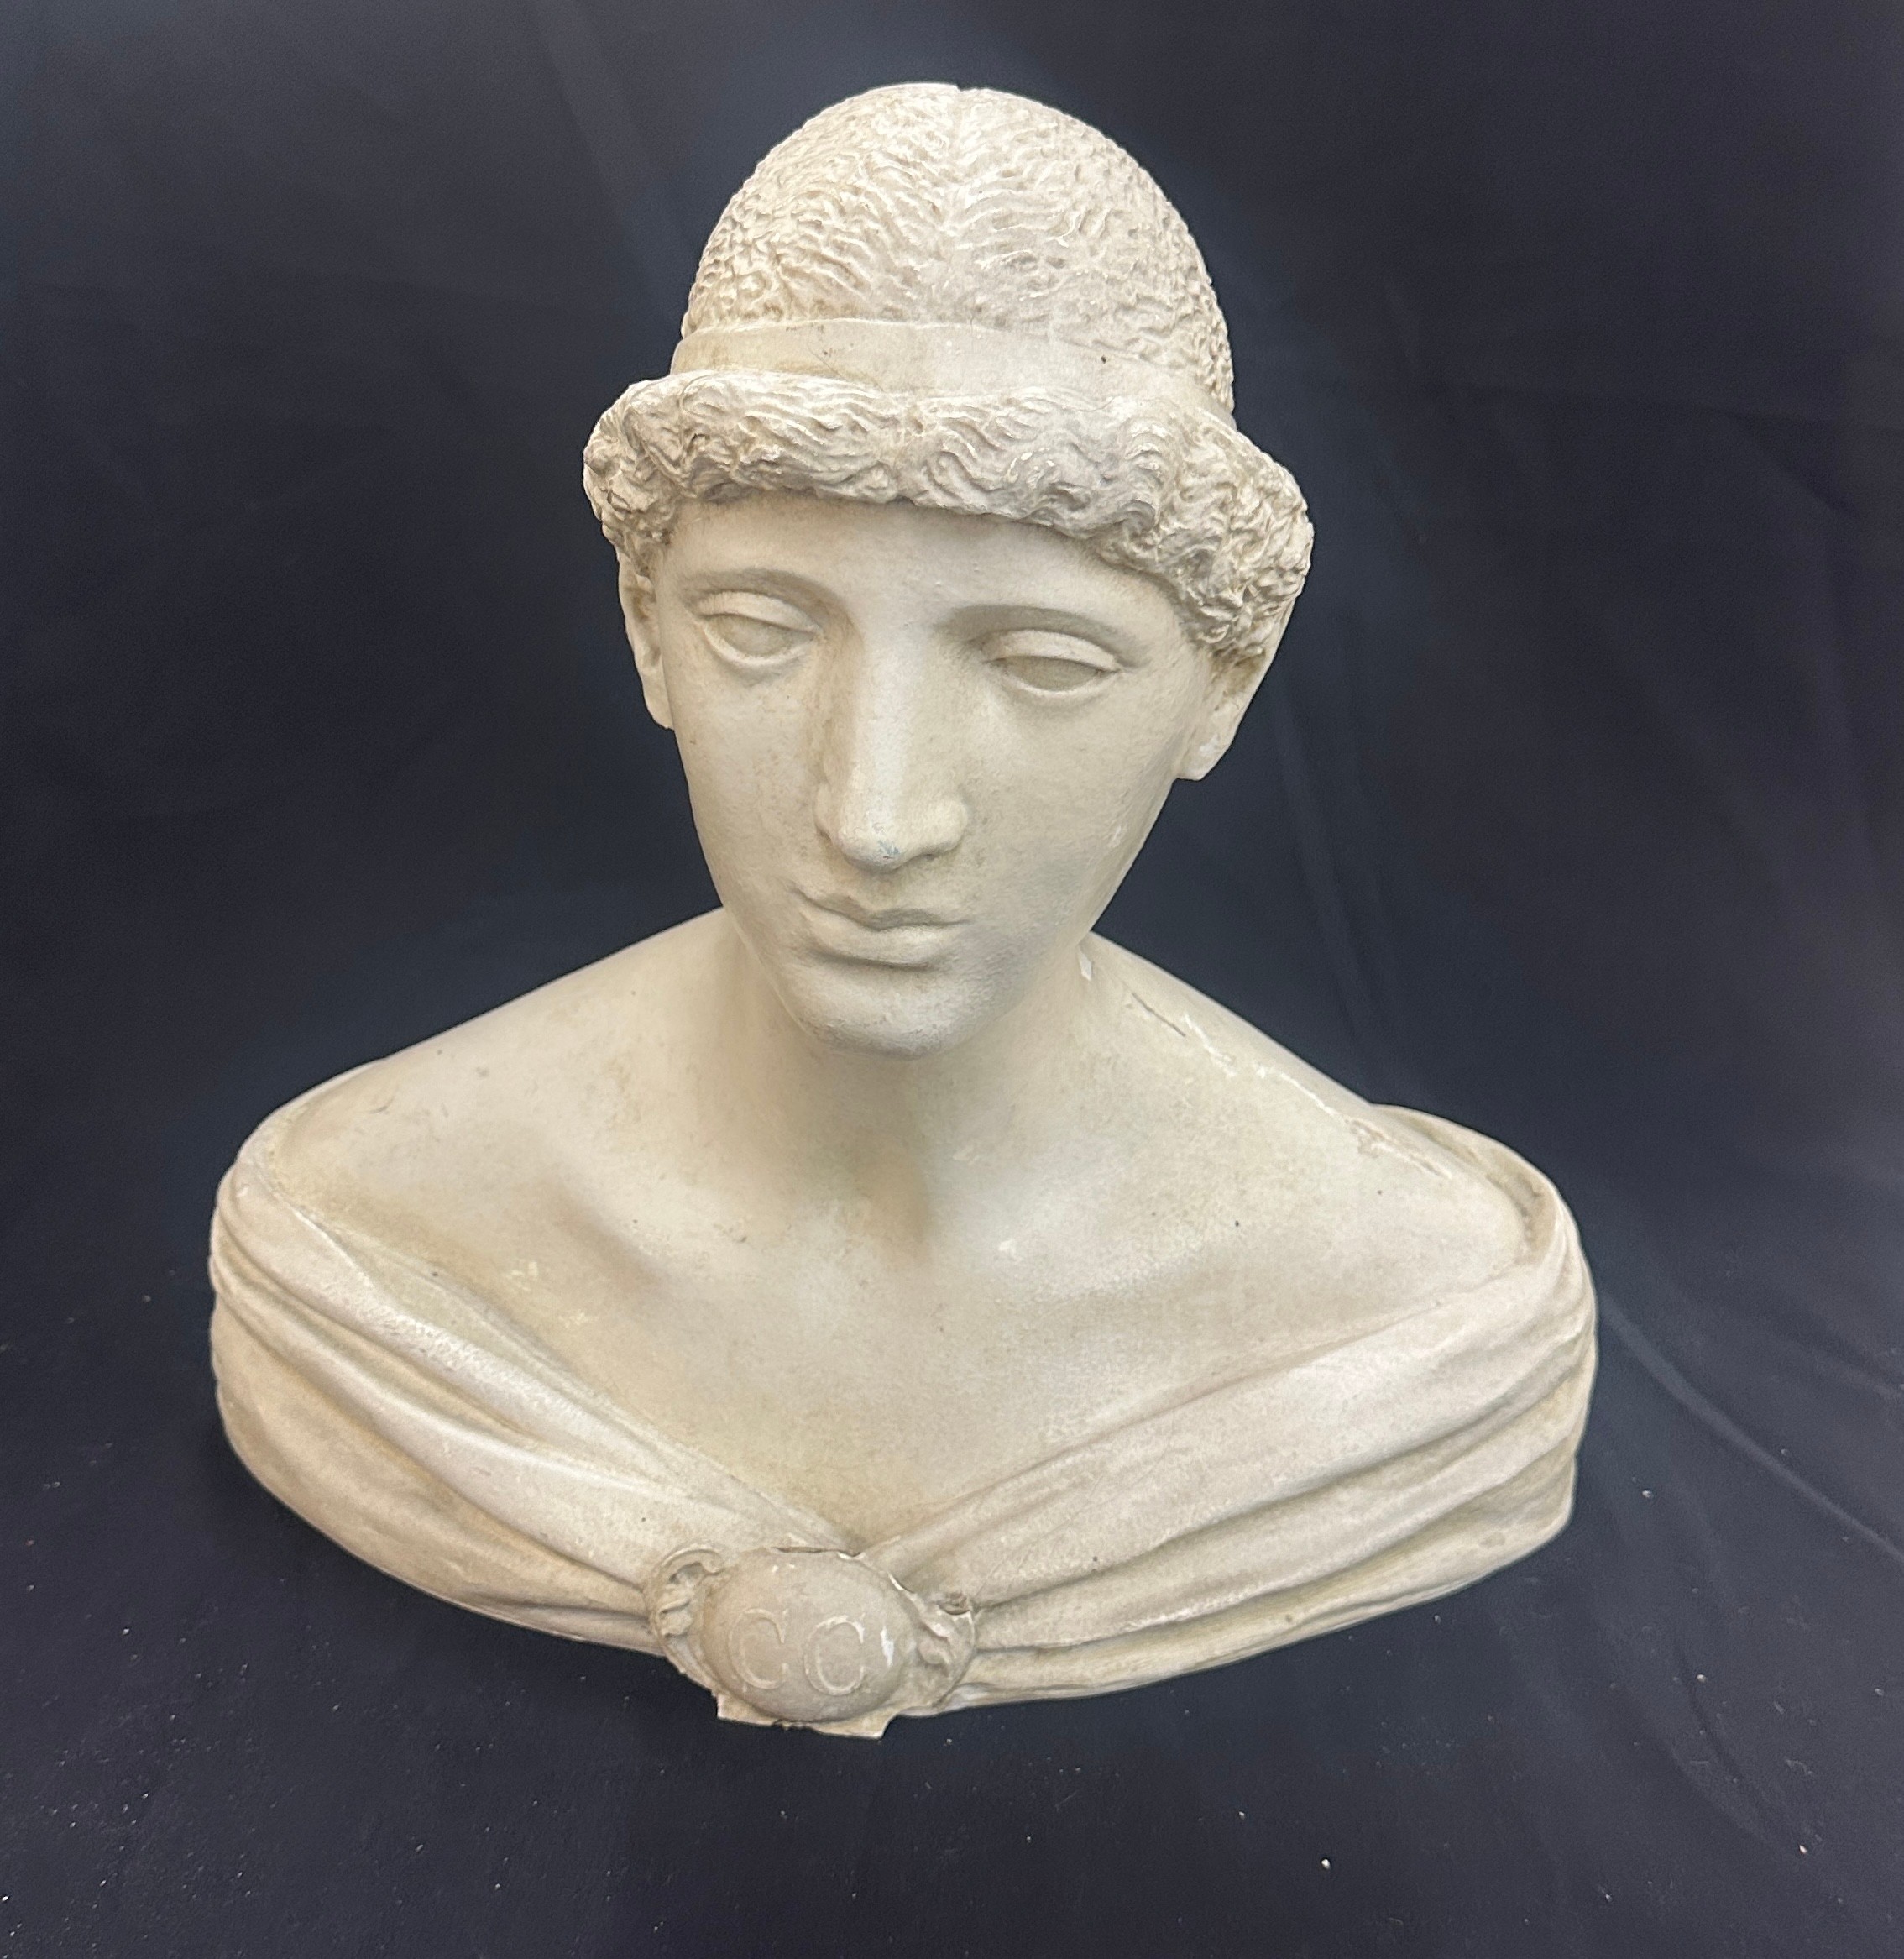 Julies ceaser bust height 18 inches - Image 3 of 5